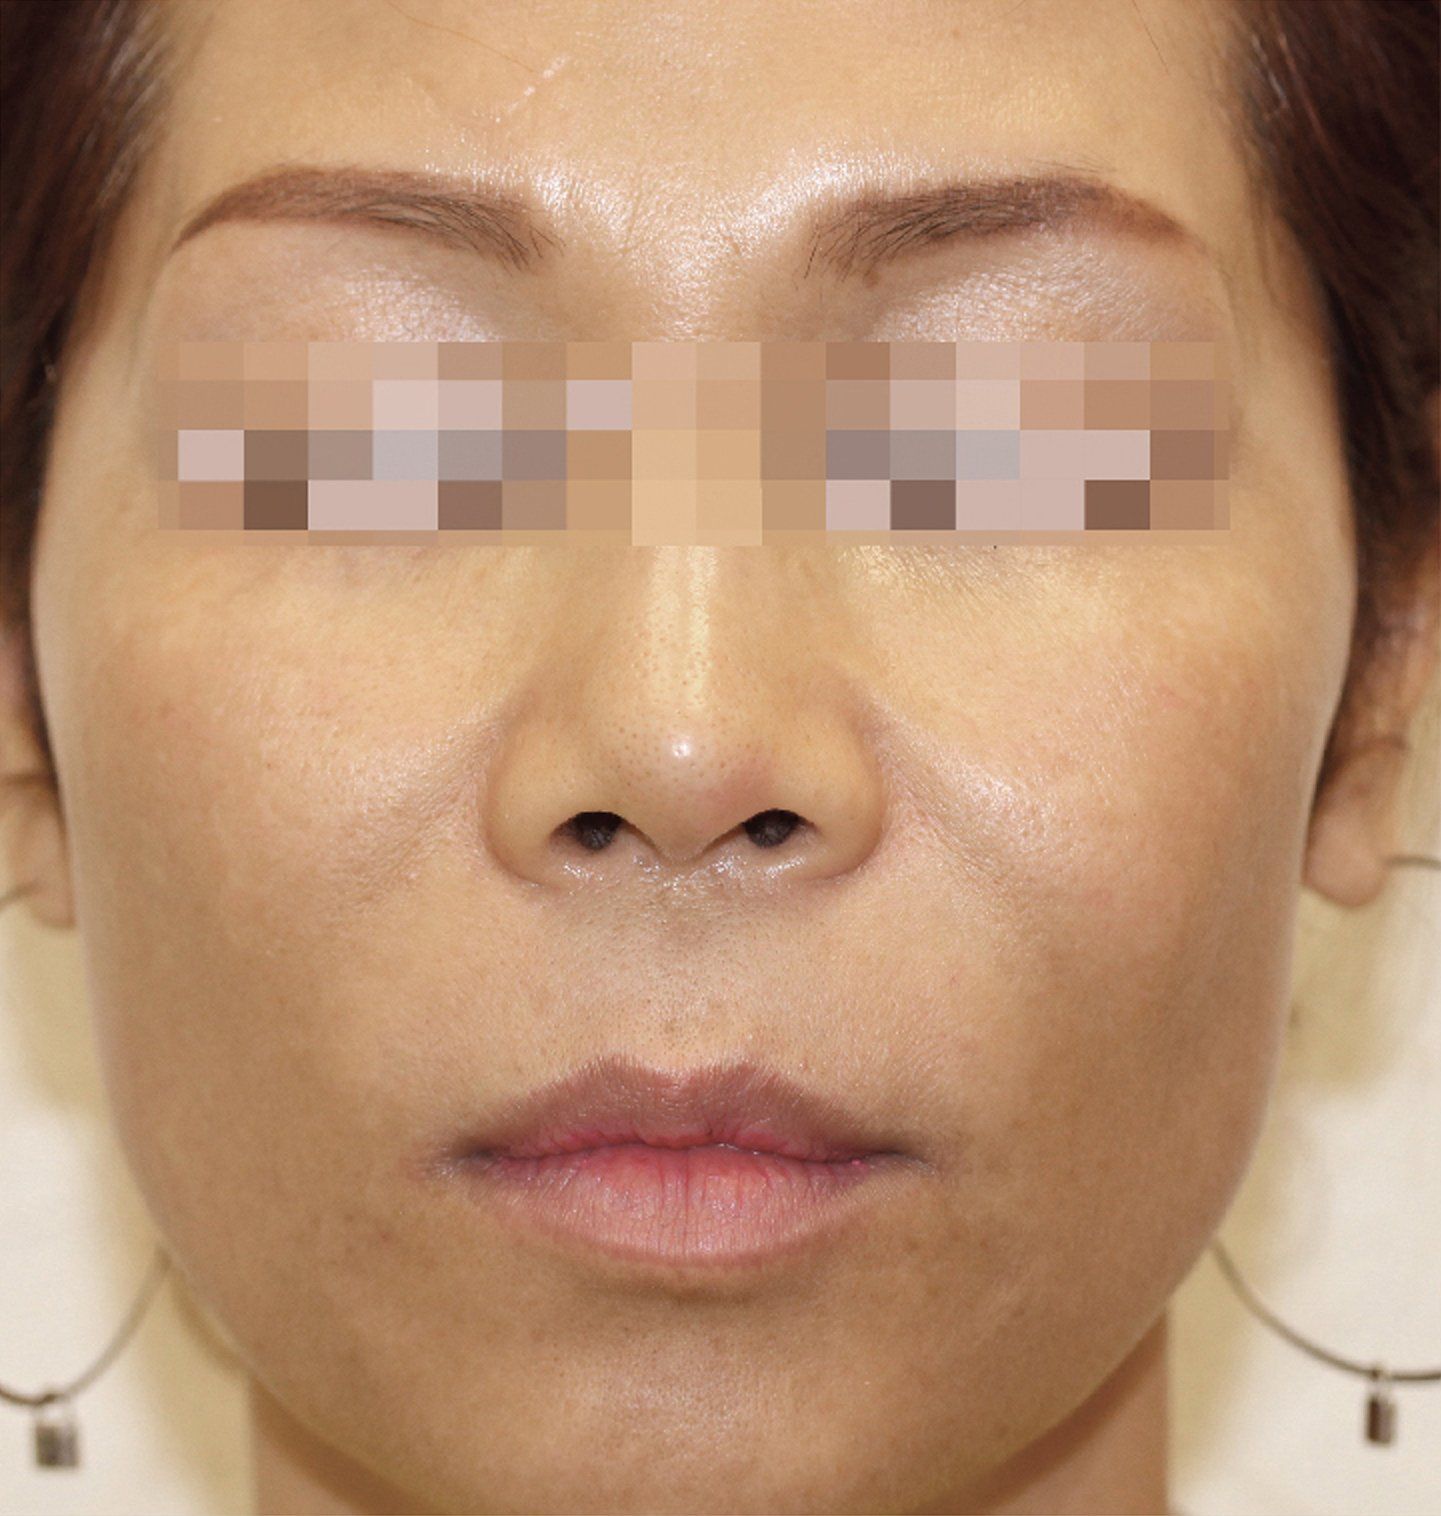 BBL After Photo - A close up of a woman's face with improved texture and less wrinkles